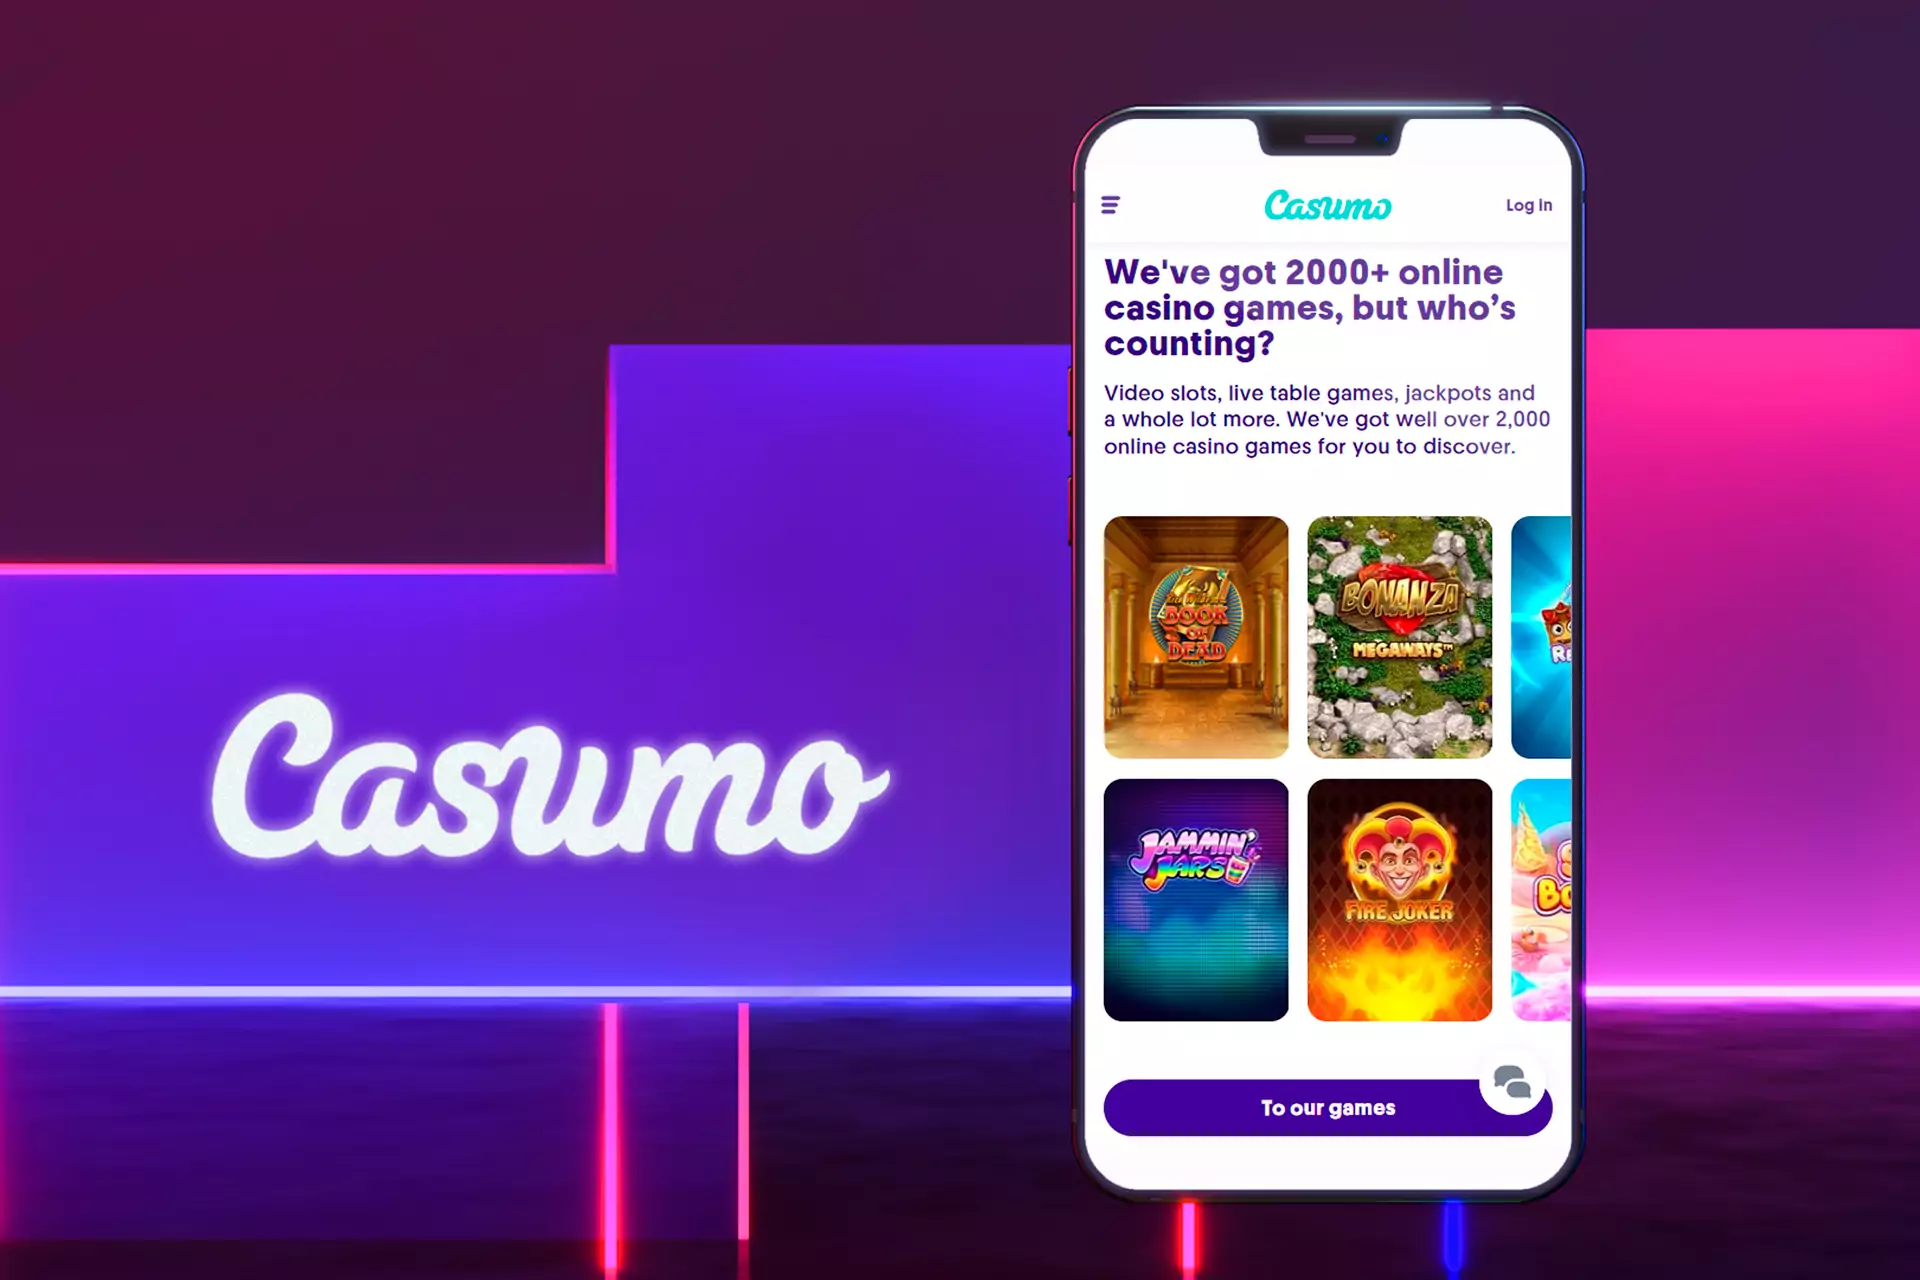 At the Casumo Casino, you can play live games with the Hindi-speaking dealers.